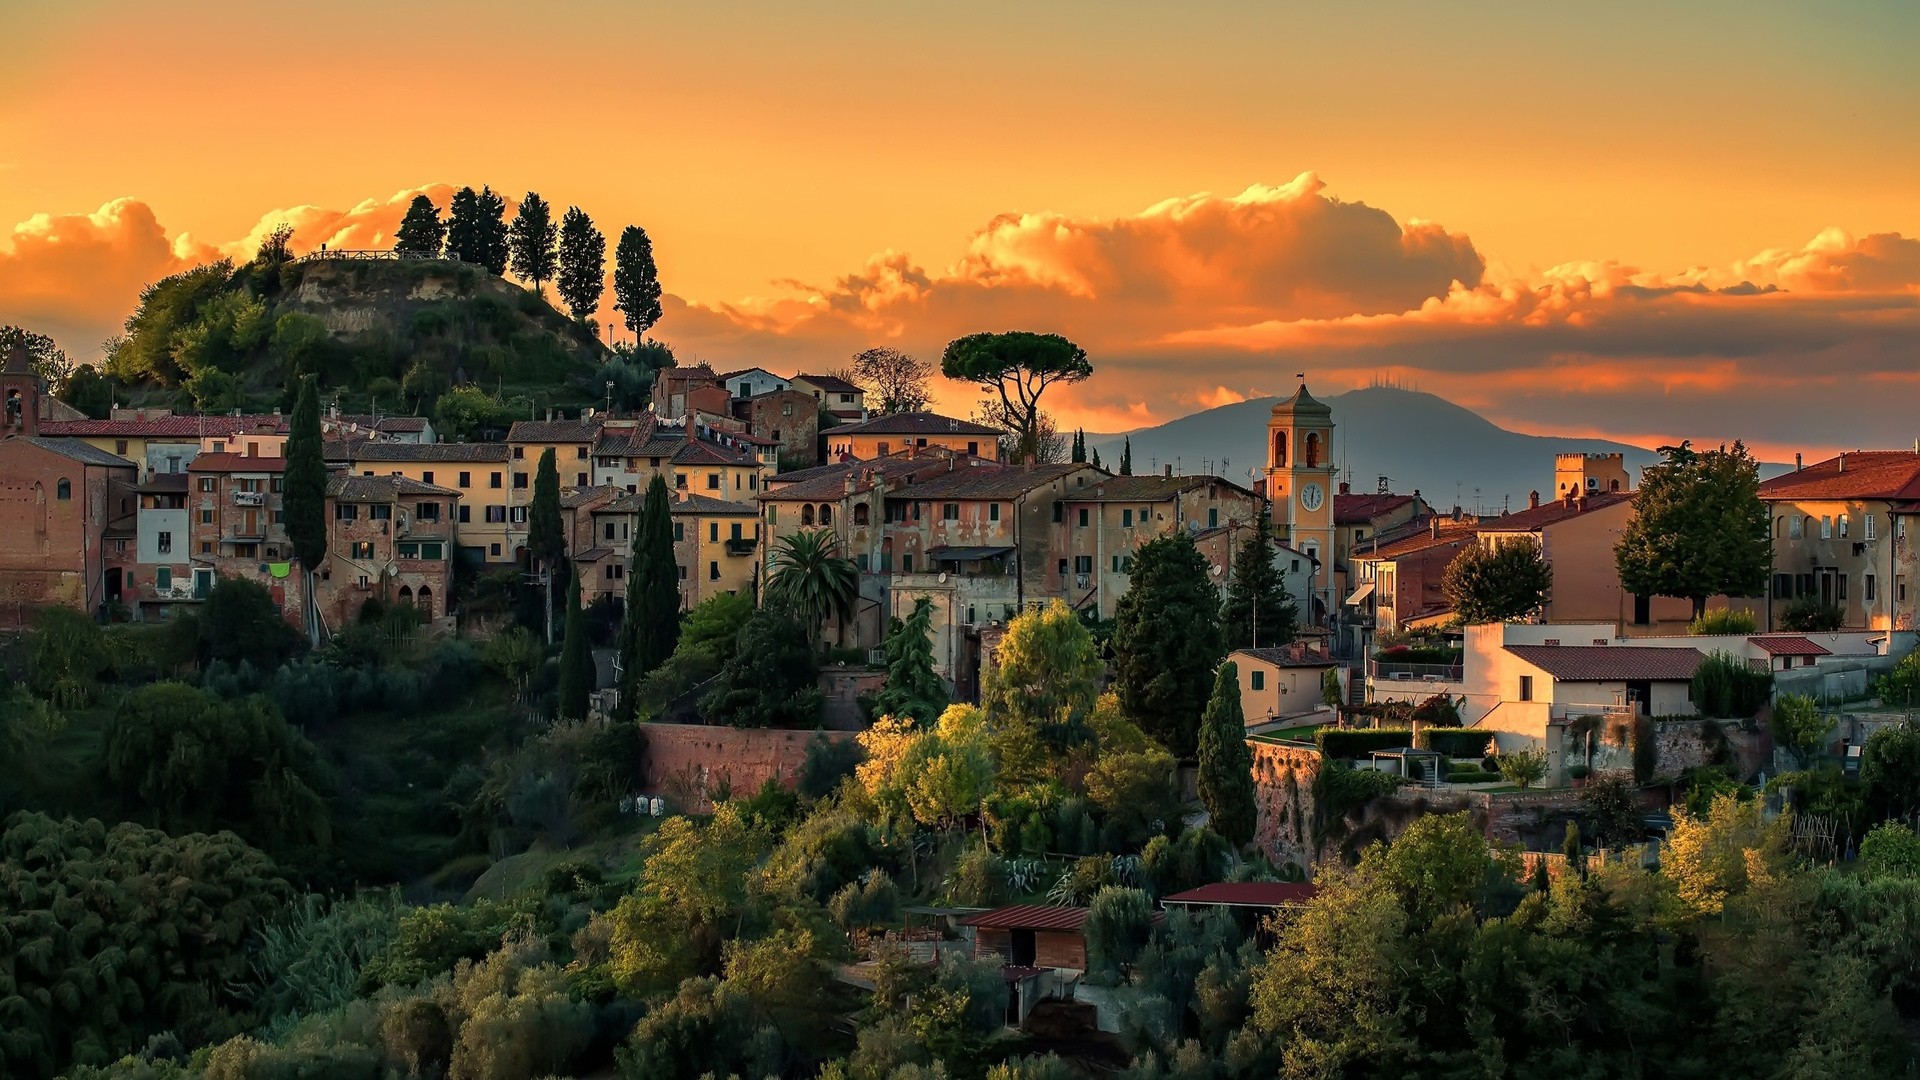 General 1920x1080 architecture building house Italy church trees clouds sunset hills tower old building history orange sky